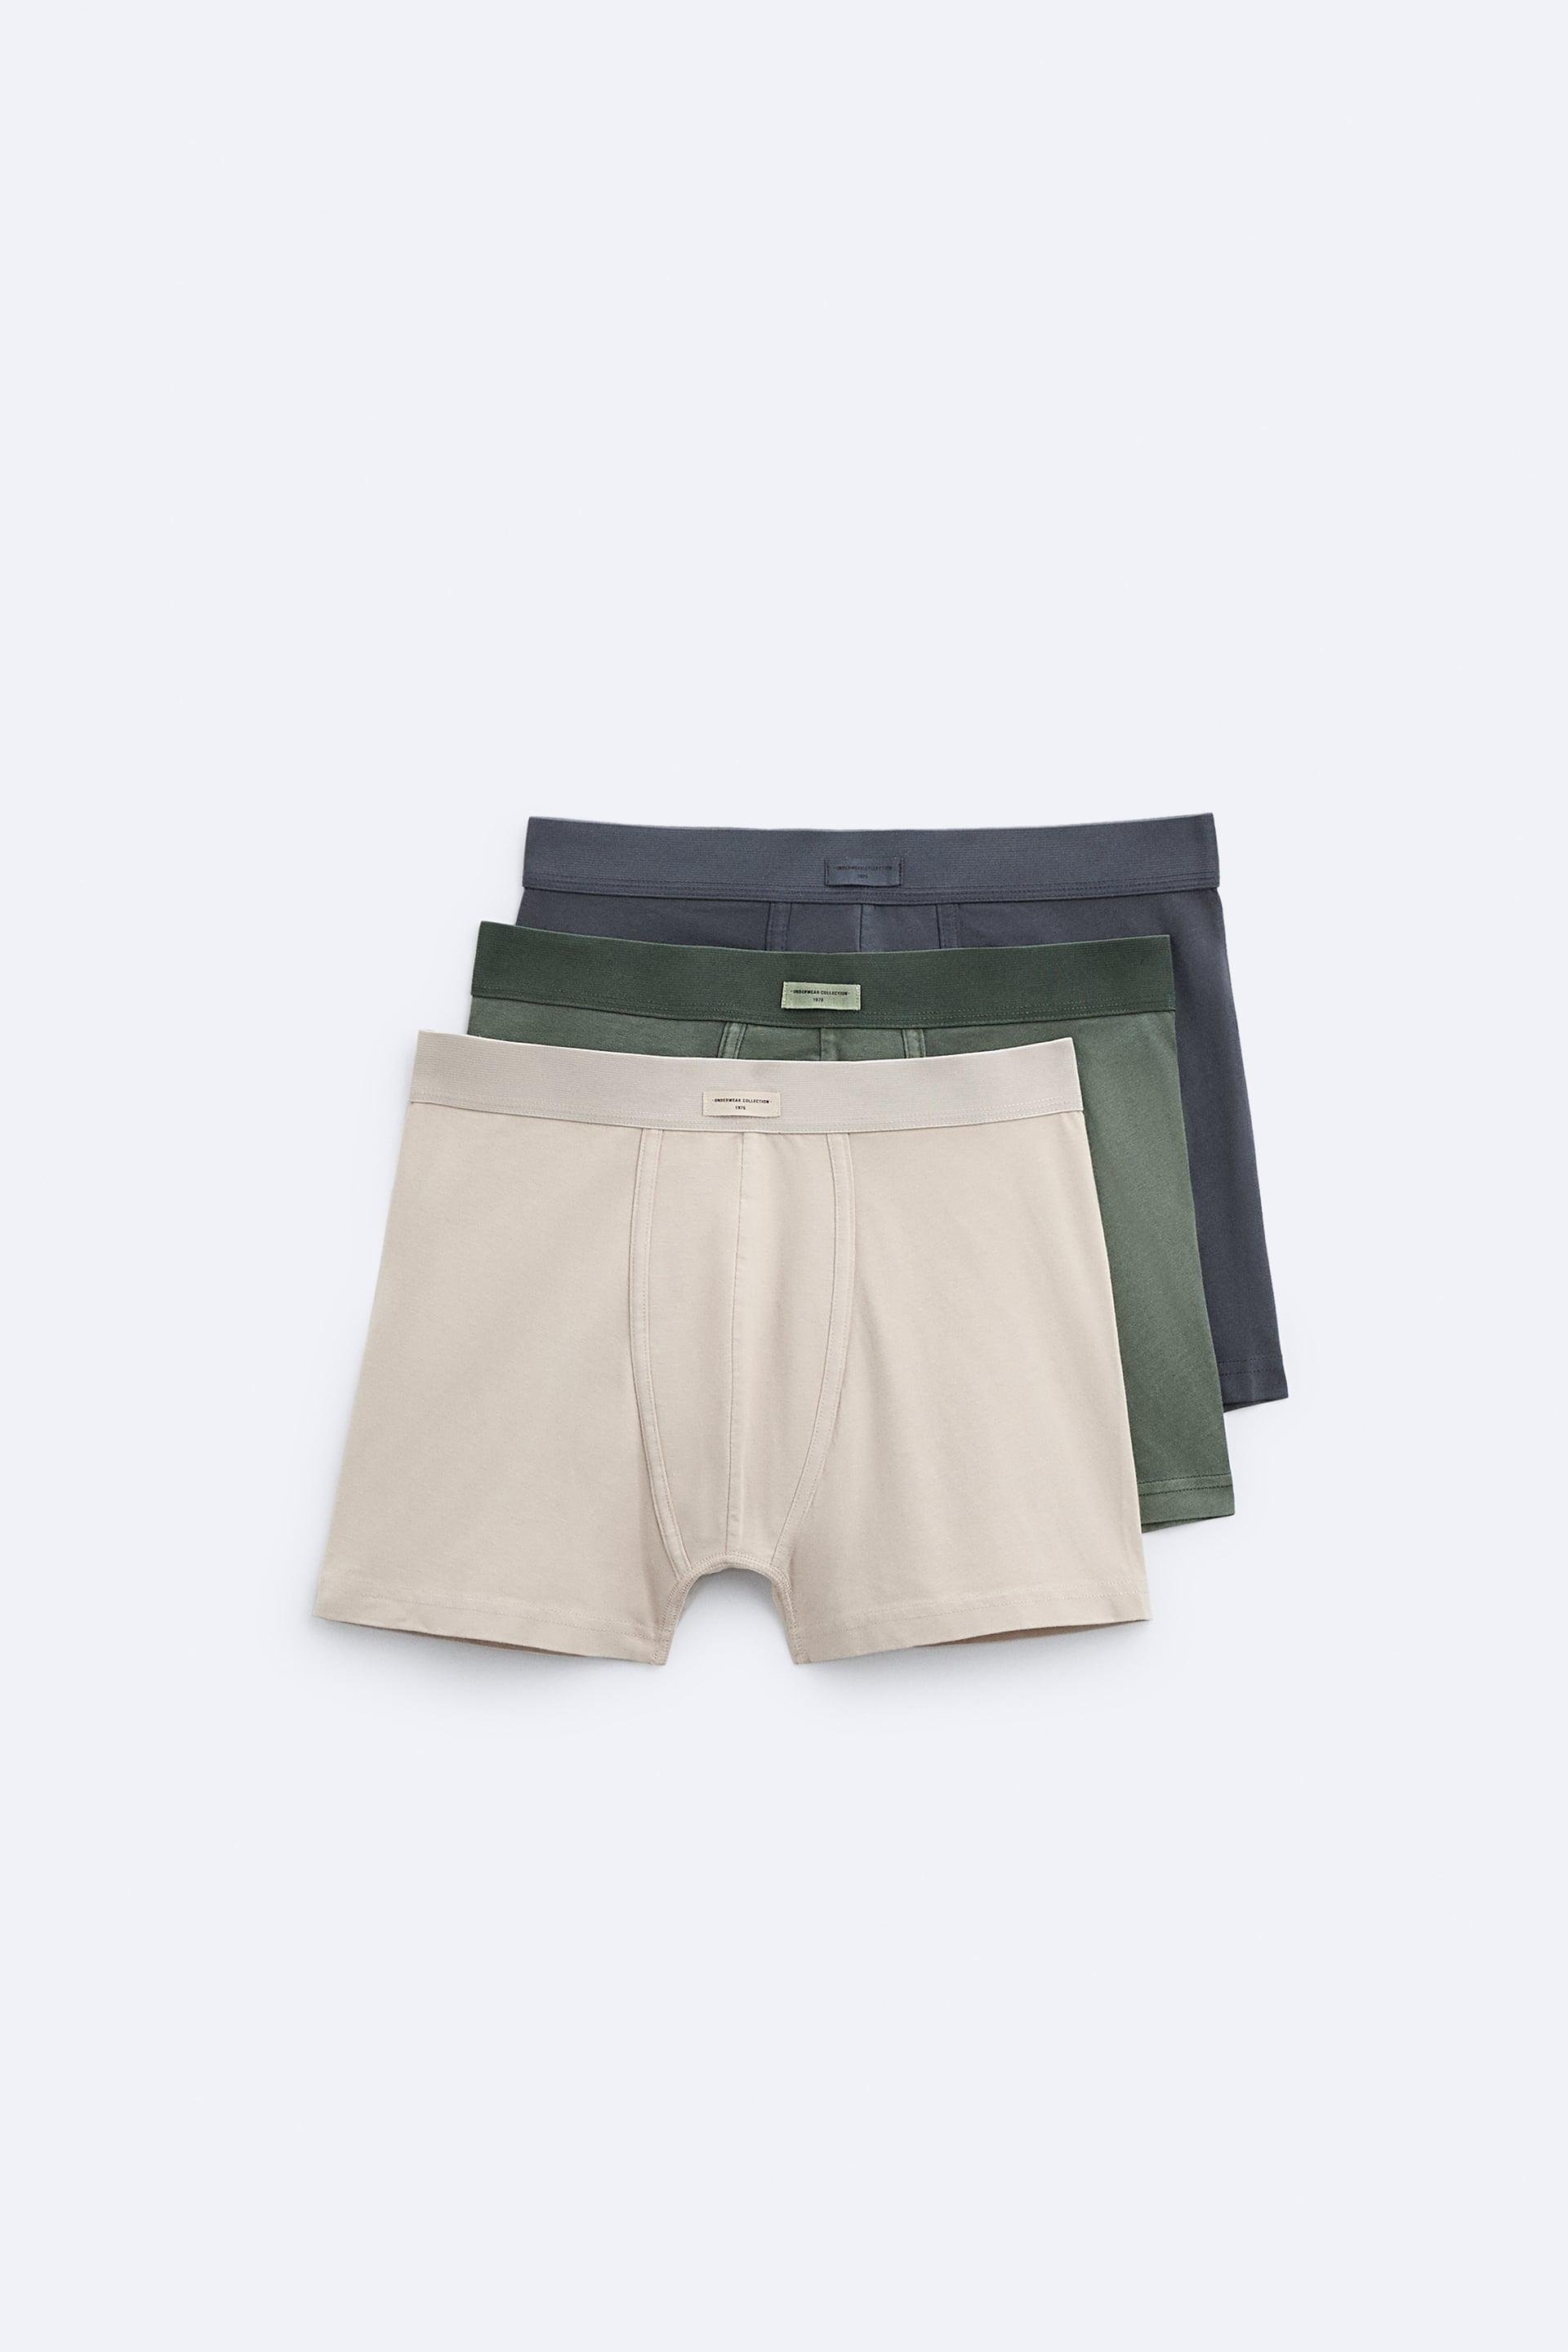 3 PACK OF BASIC BOXERS by ZARA